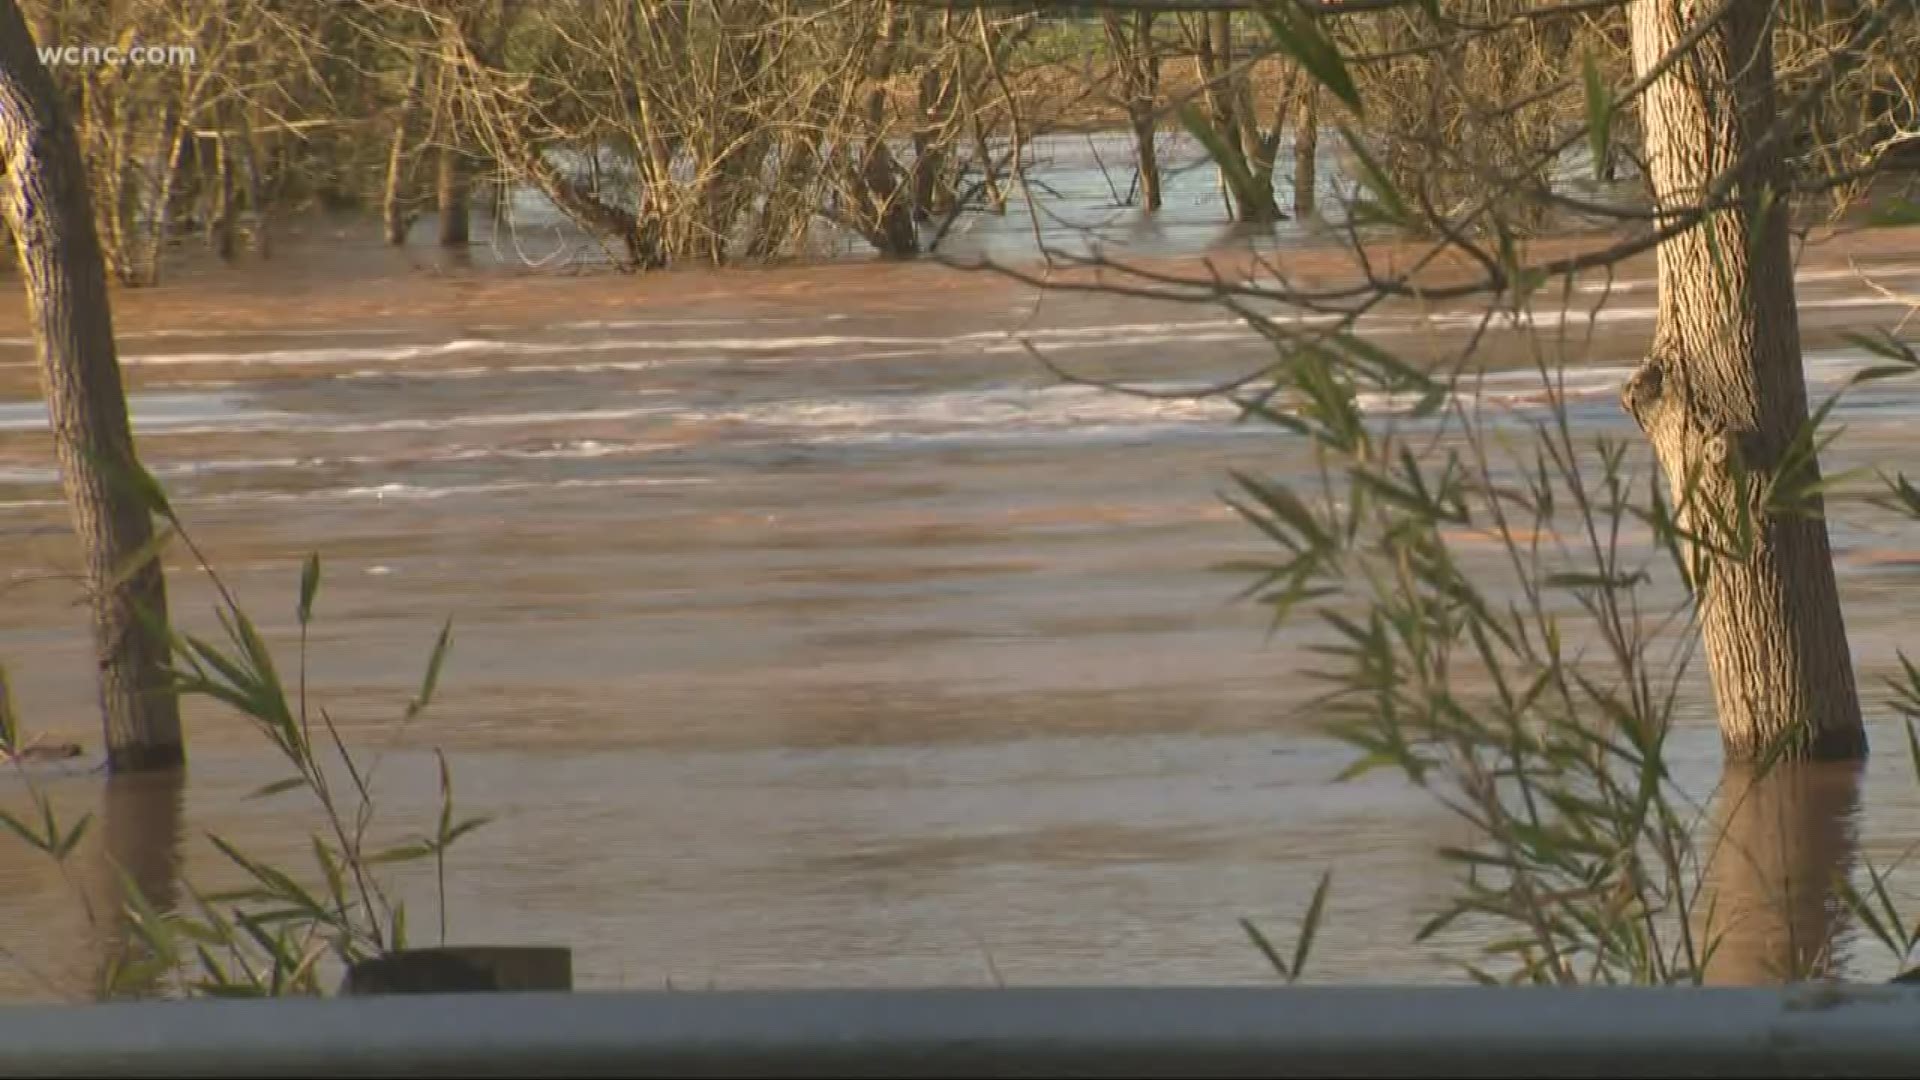 The heavy rain and strong winds are gone, but rivers continued to rise across the Carolinas, including the South Ford River in Gaston County.